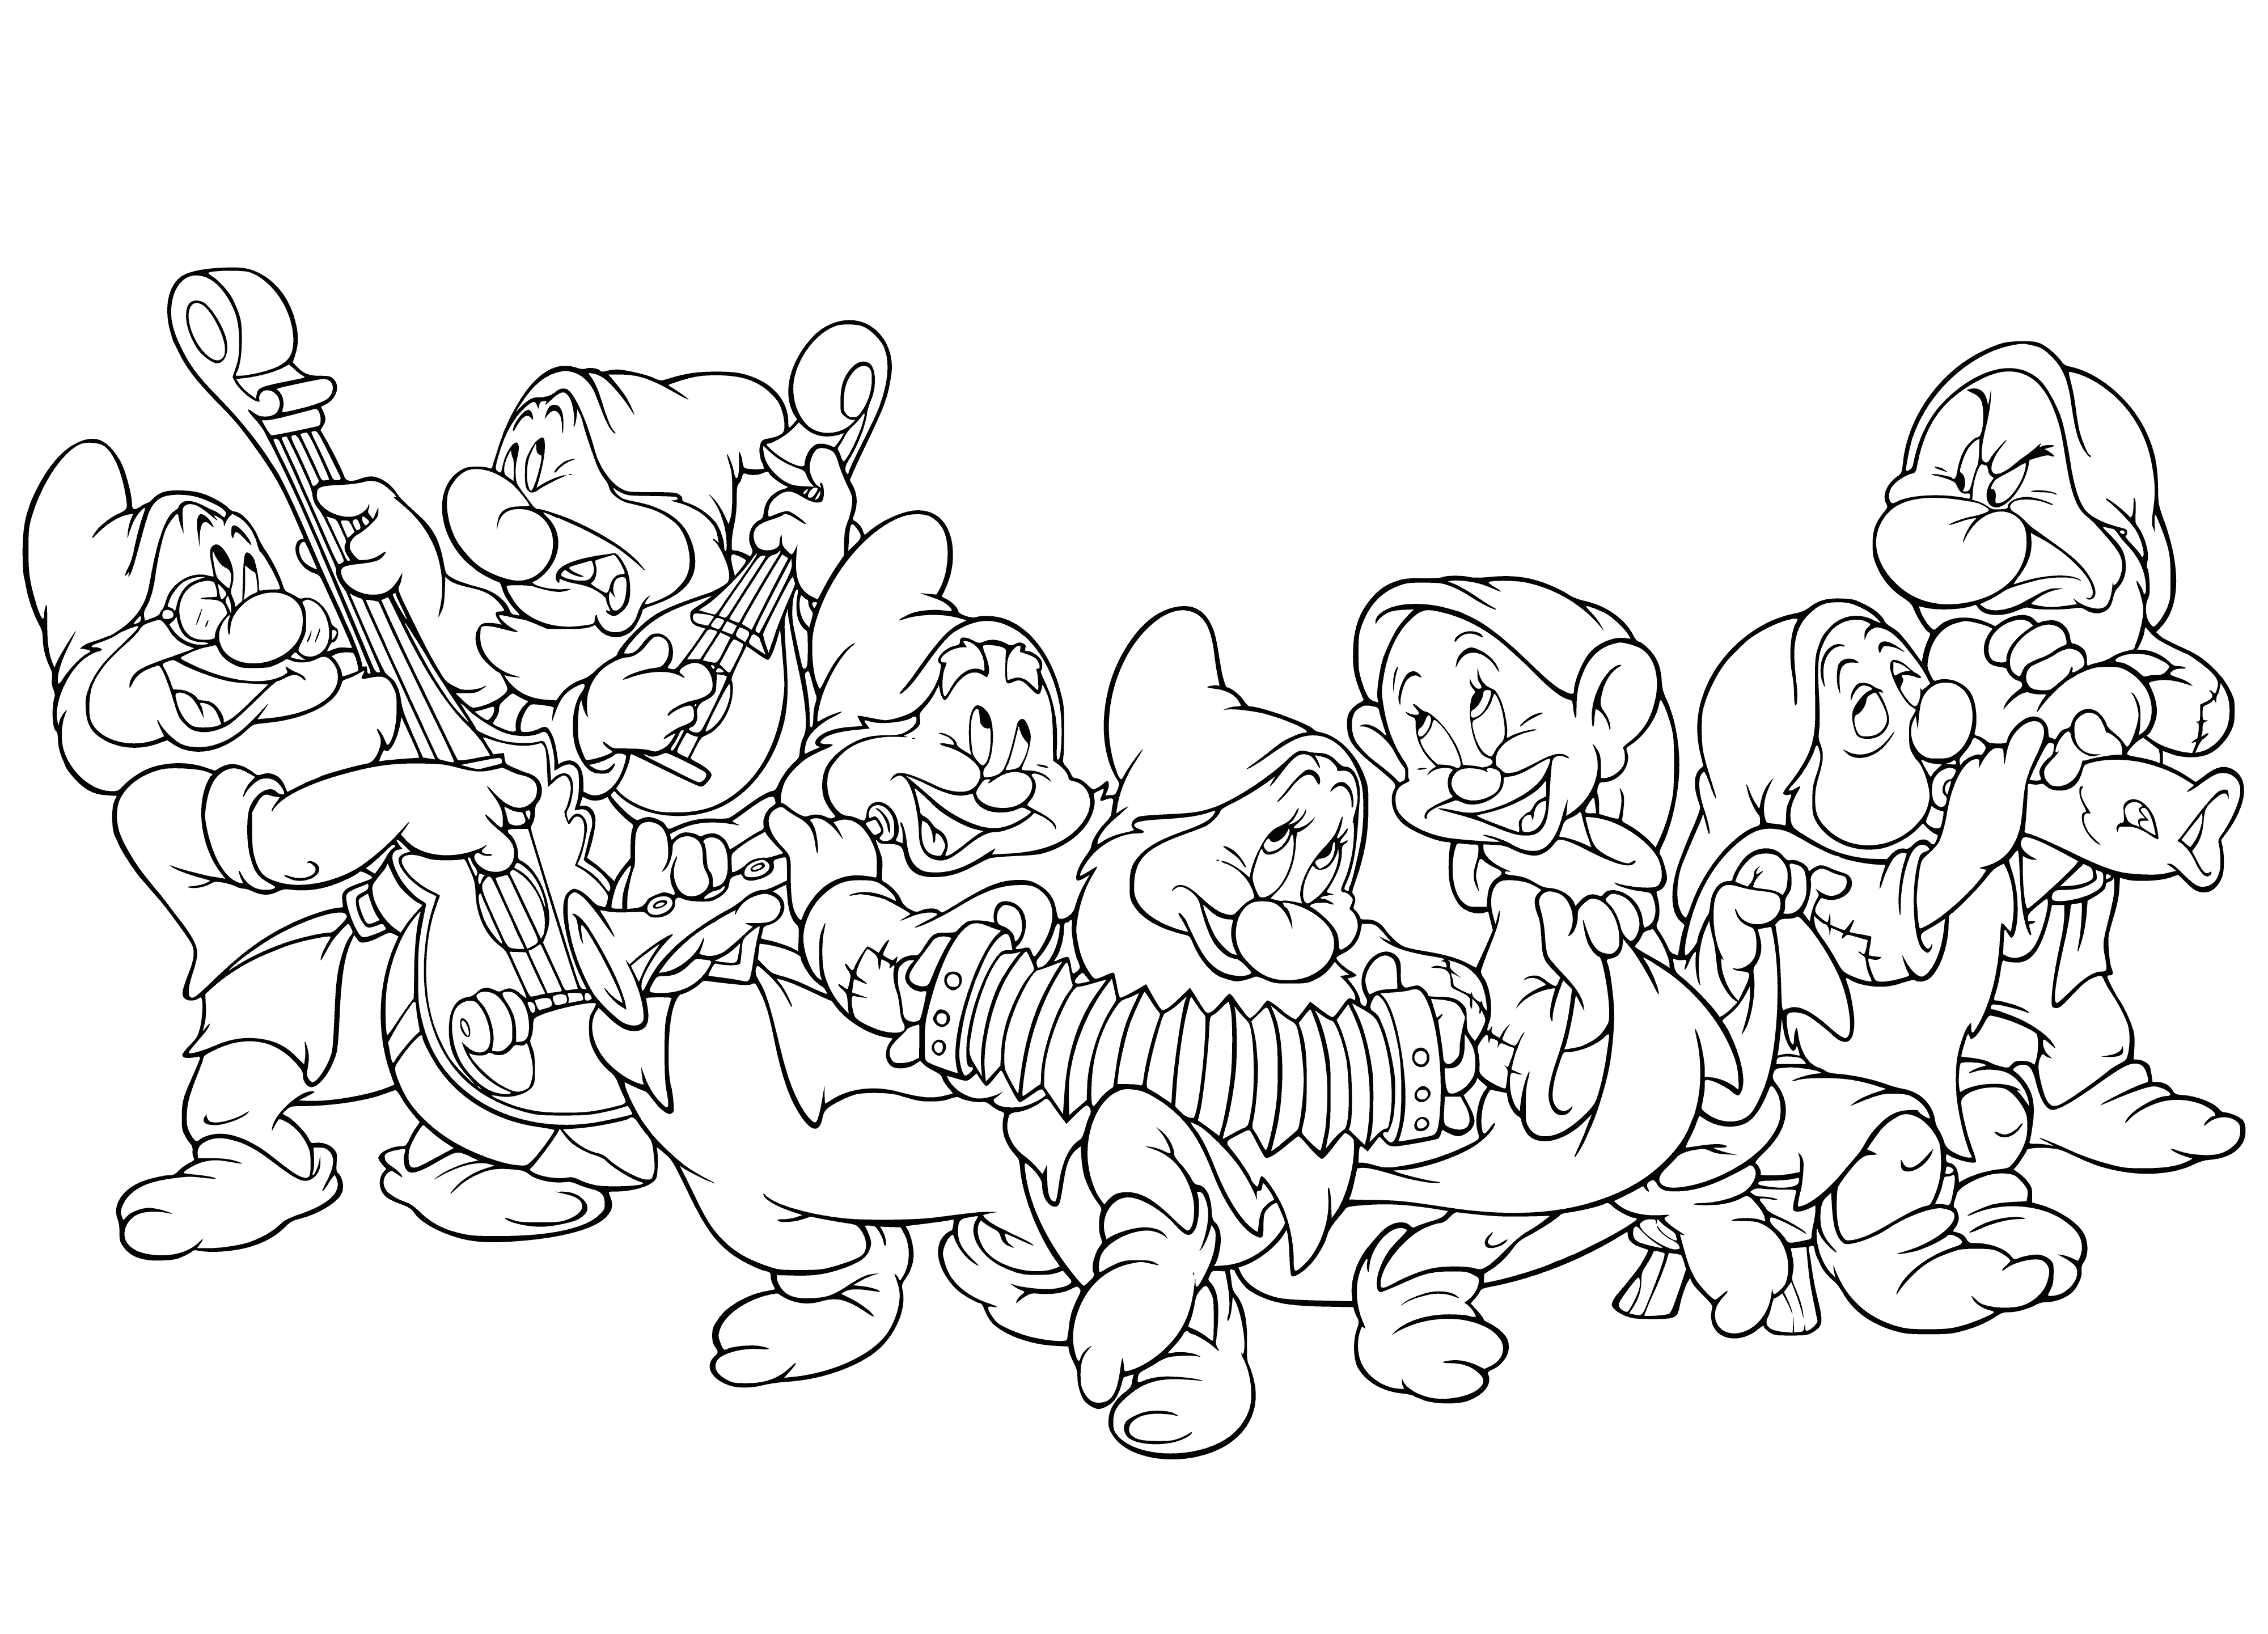 The dwarfs are having fun coloring page